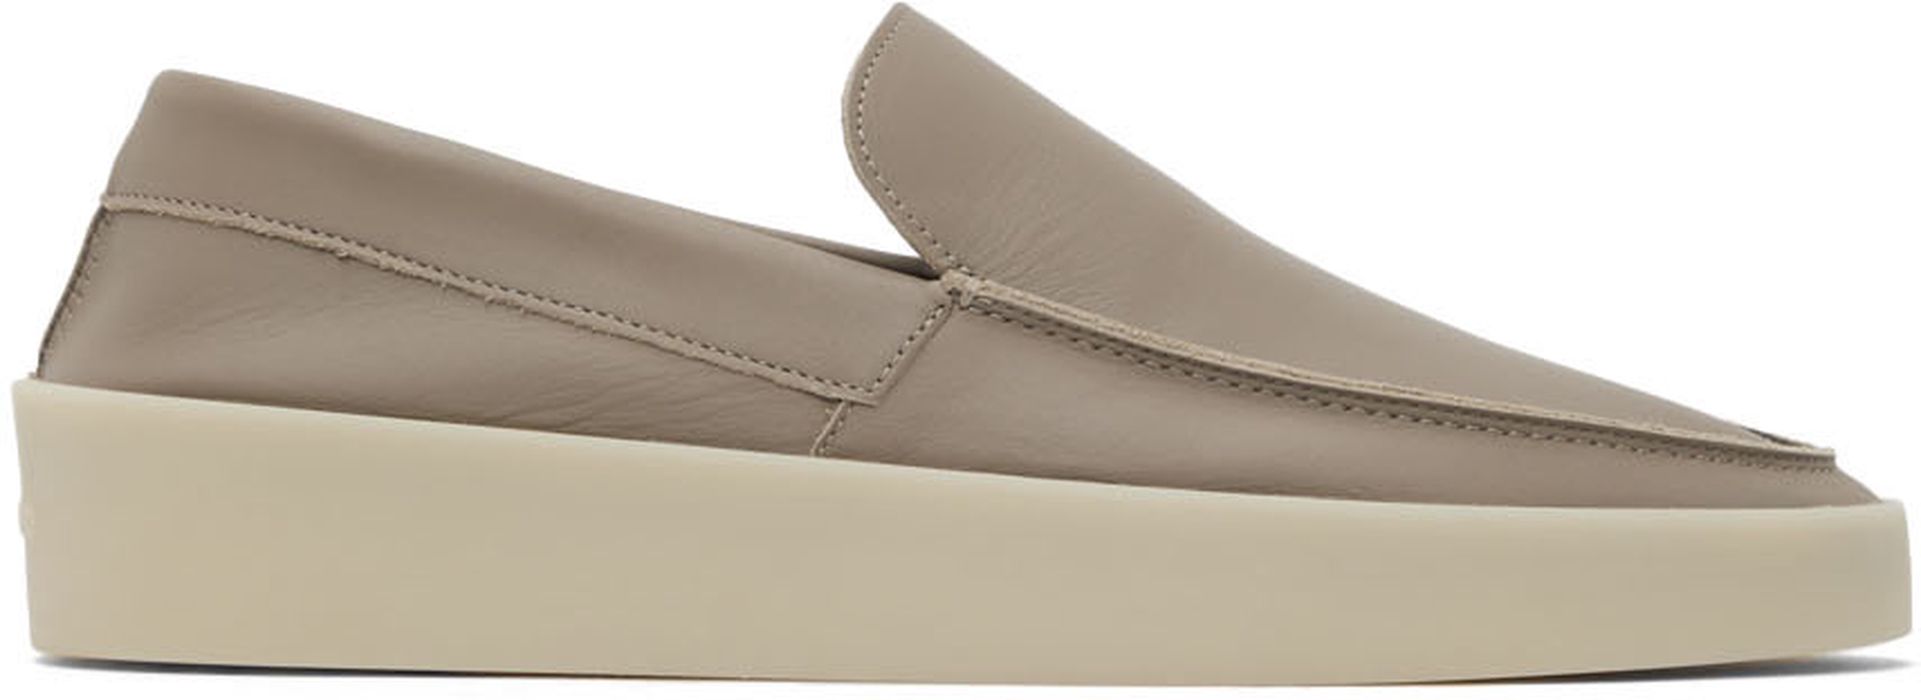 Fear of God Taupe Leather 'The Loafer' Loafers